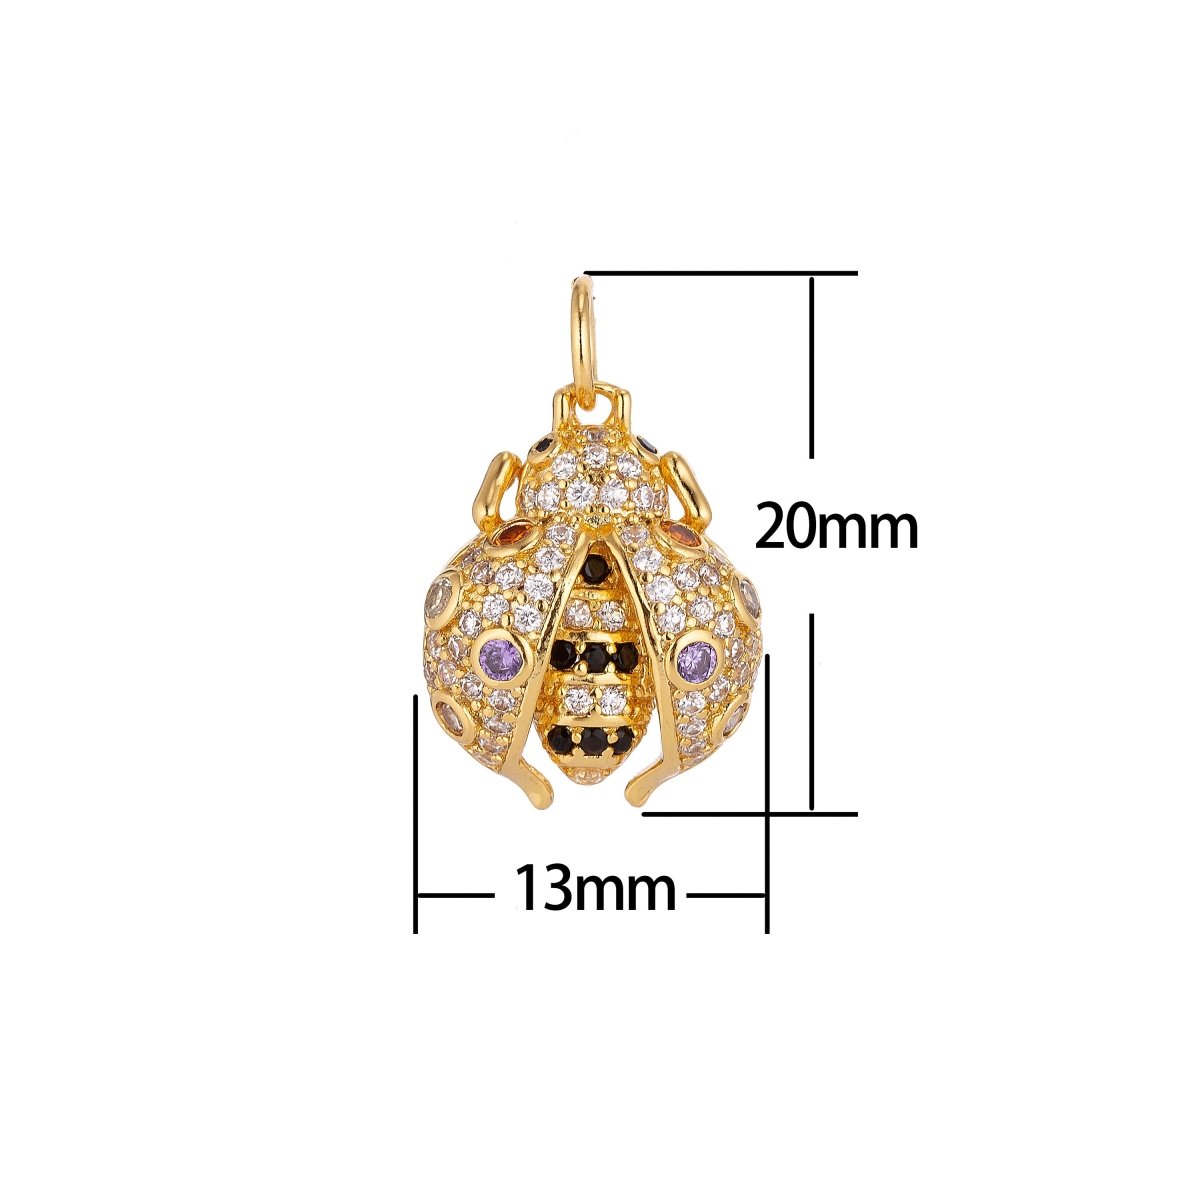 Gold Filled Shiny Sparkle Ladybug Crystal Cubic Zirconia Cabochons Bracelet Delicate Necklace Pendant Earring Gift for Jewelry MakingC130 - DLUXCA